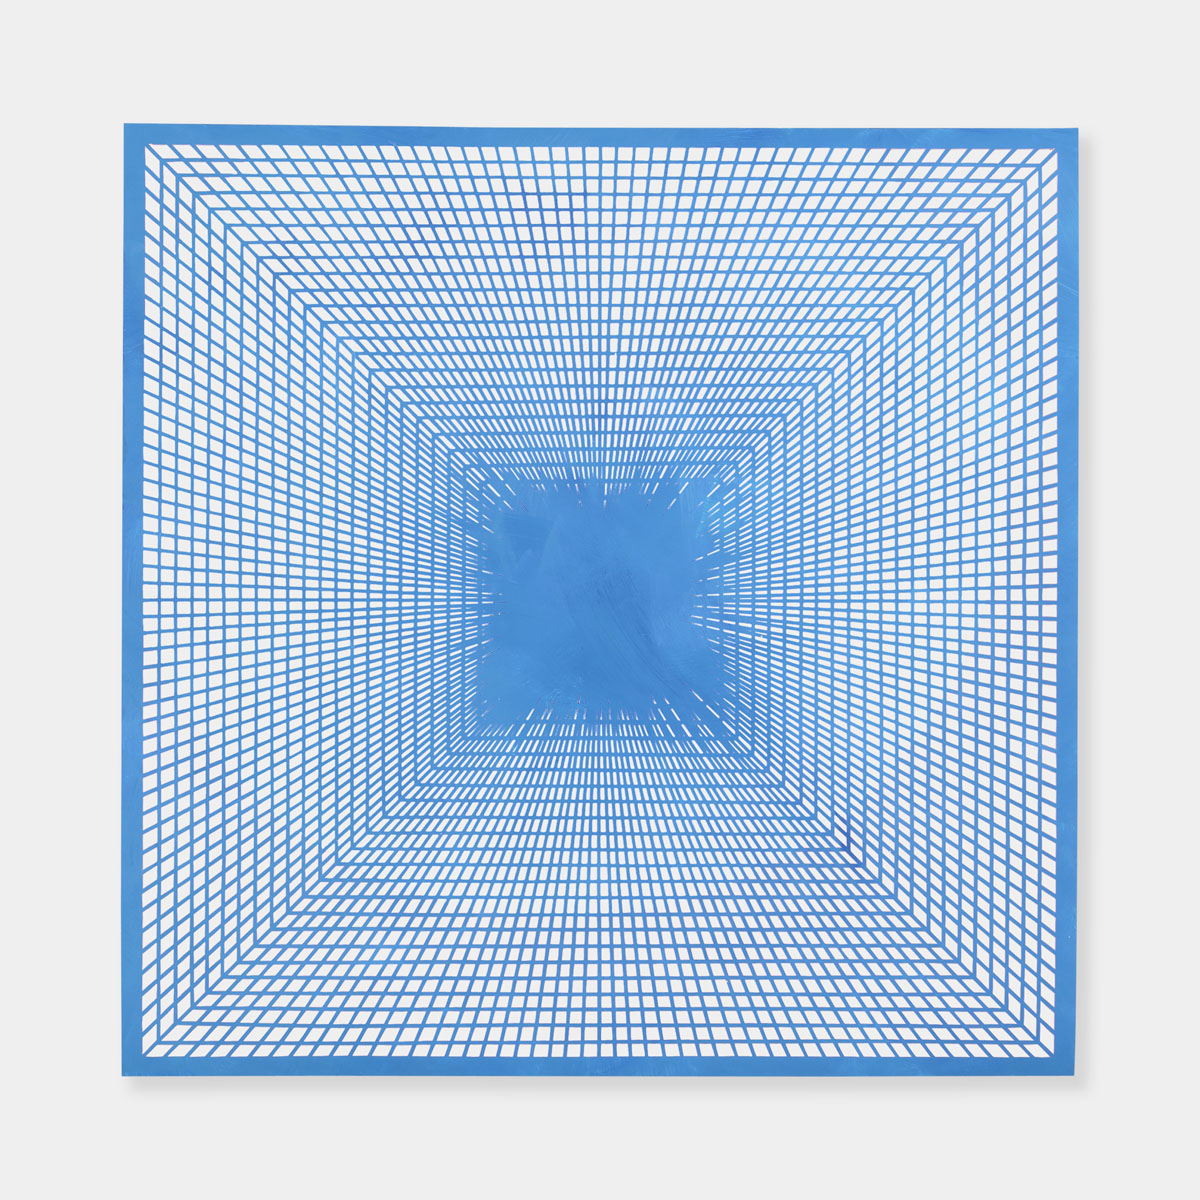 Artsuite - An original painting by Leigh Suggs. The artwork is hand cut out of light blue acrylic on yupo to form a symmetrical square intricate web.